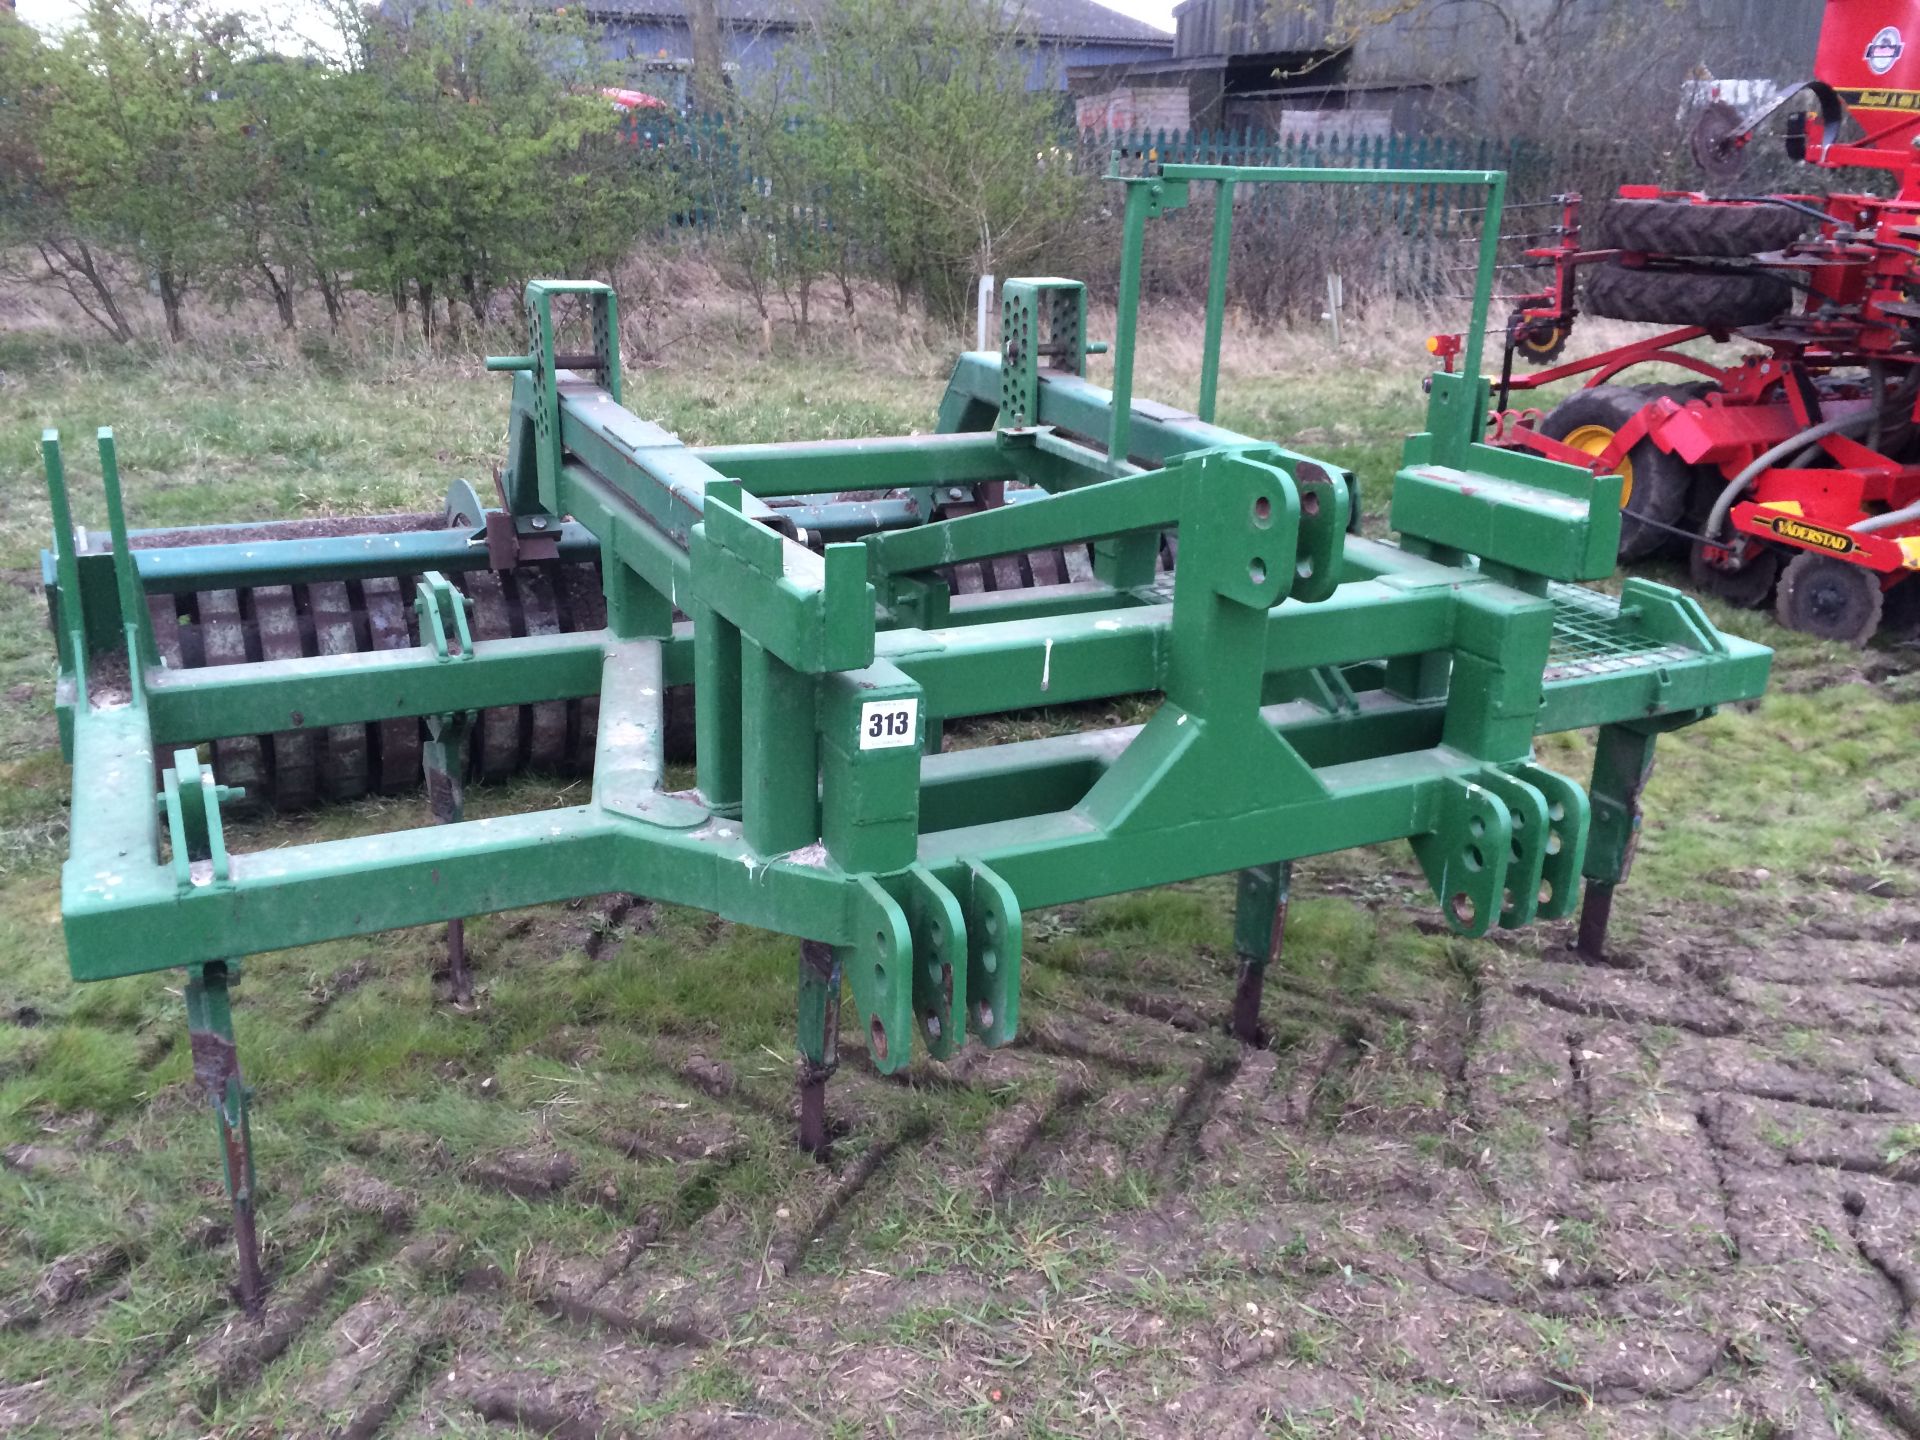 Custon made seed drill on Simba Frame with 5 legs